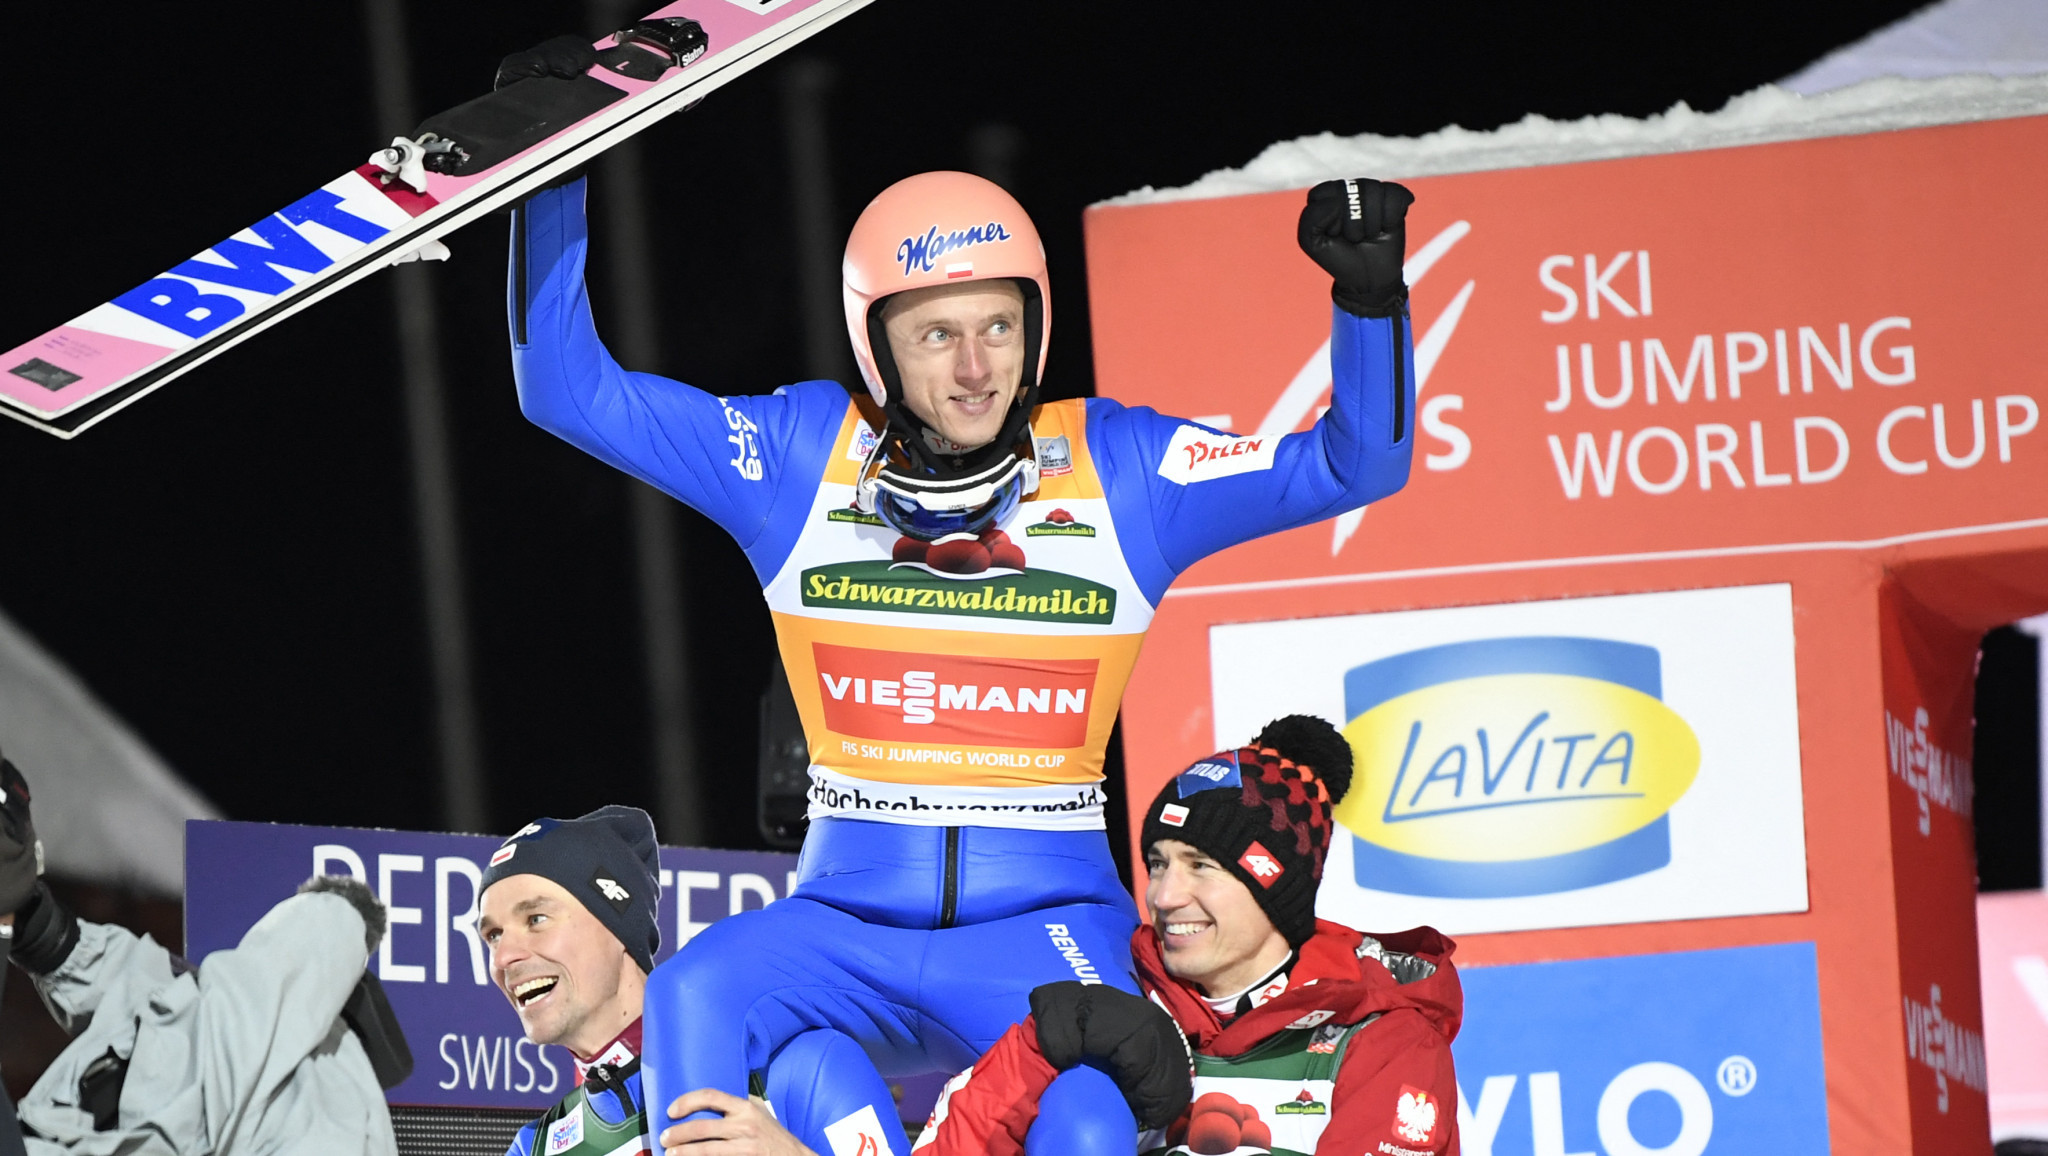 Dawid Kubacki's third win of the Ski Jumping World Cup season came in Titisee-Neustadt ©Getty Images